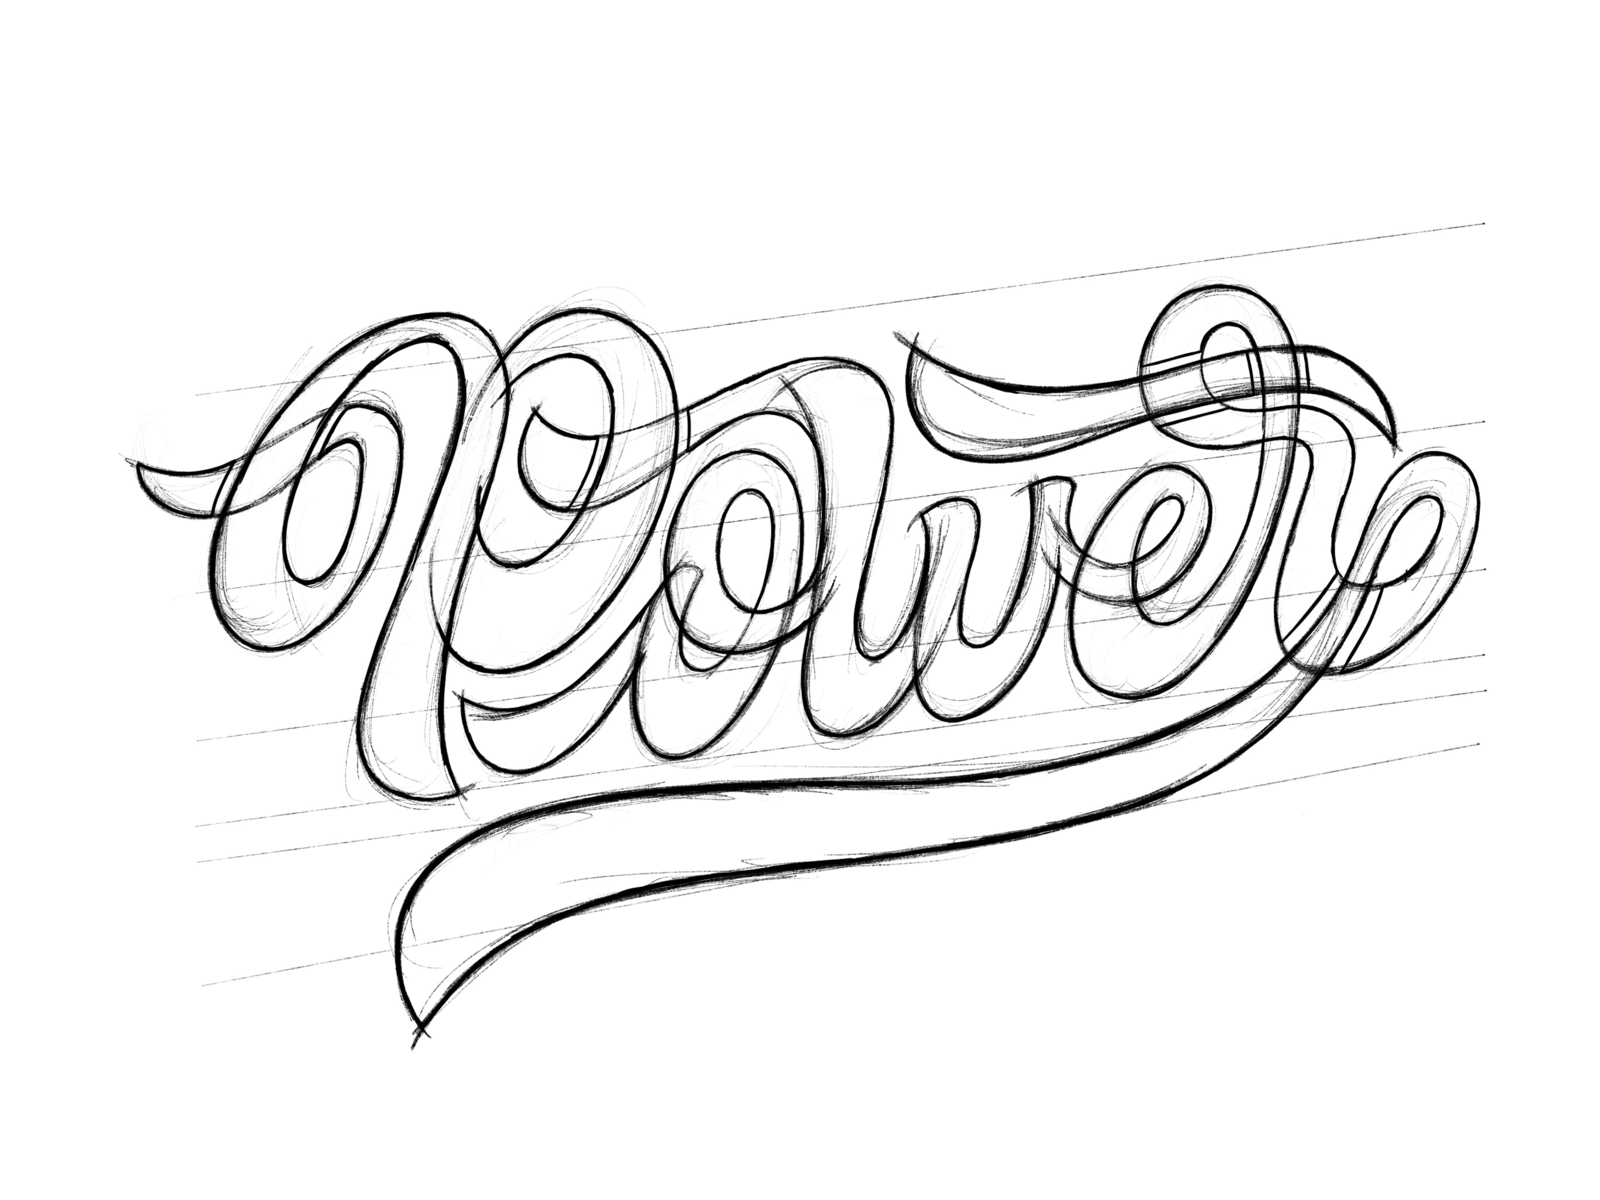 Power Sketch by Zachary Styles on Dribbble